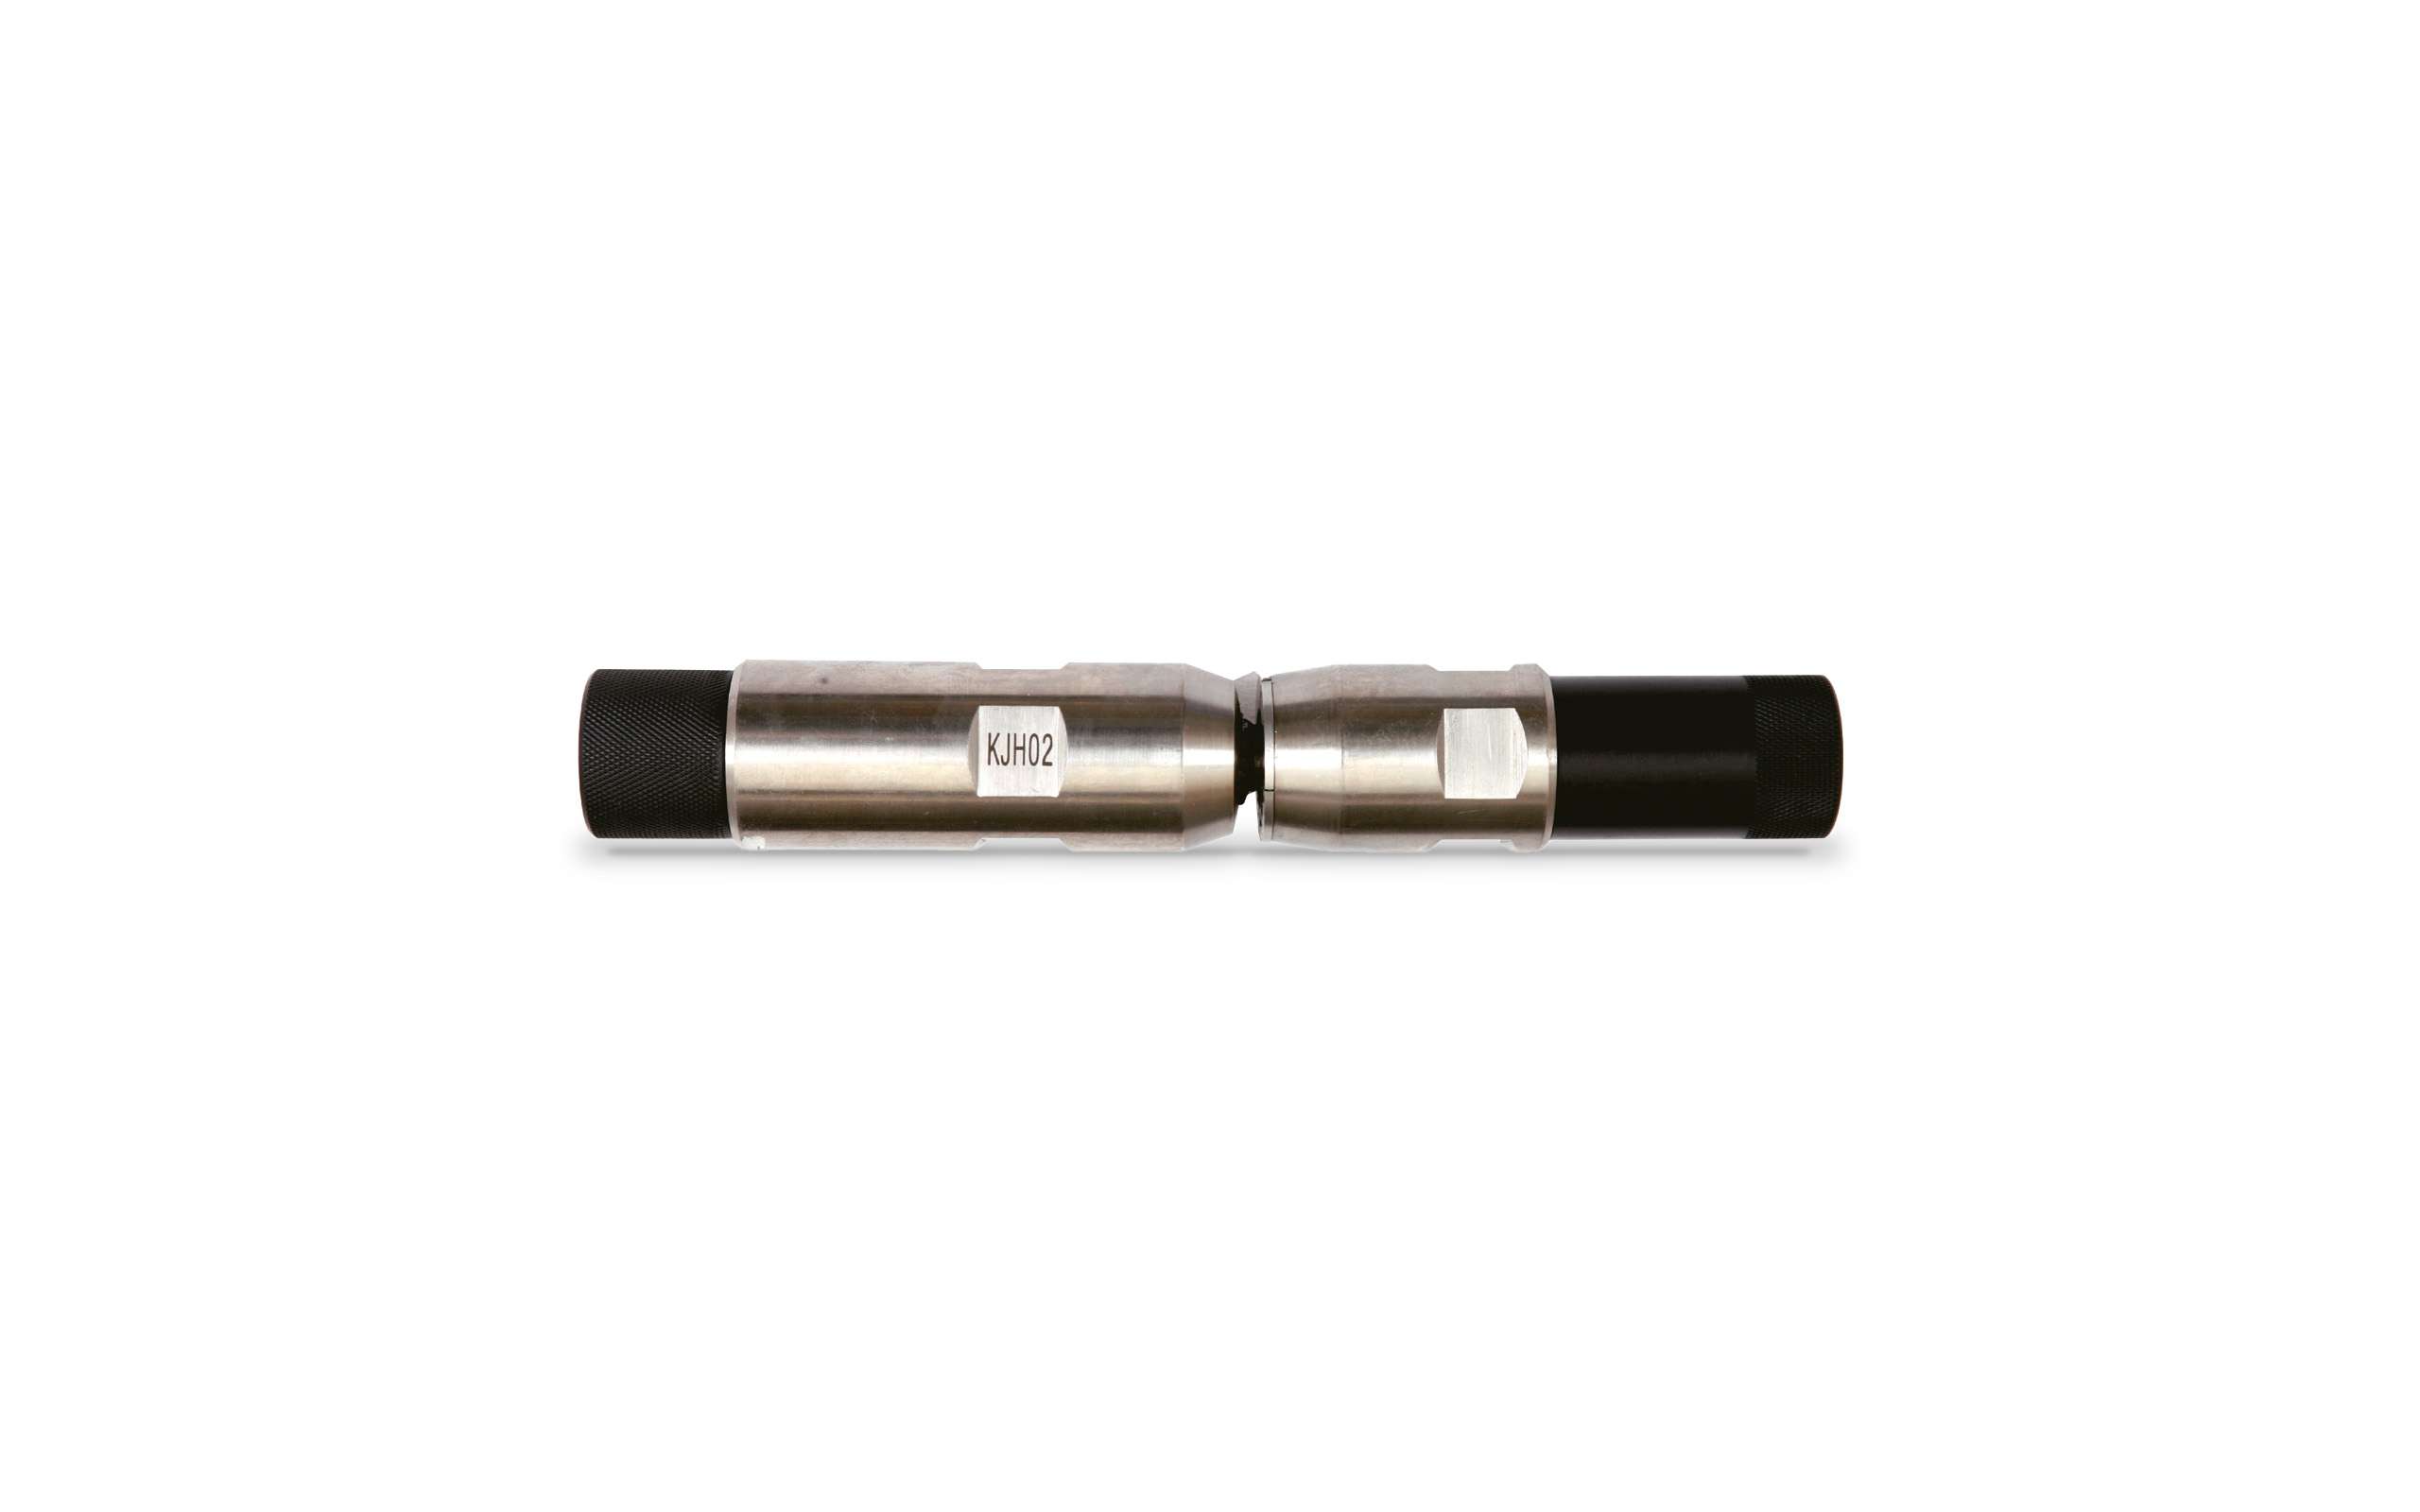 Knuckle Joint Head - metal tube with black ends